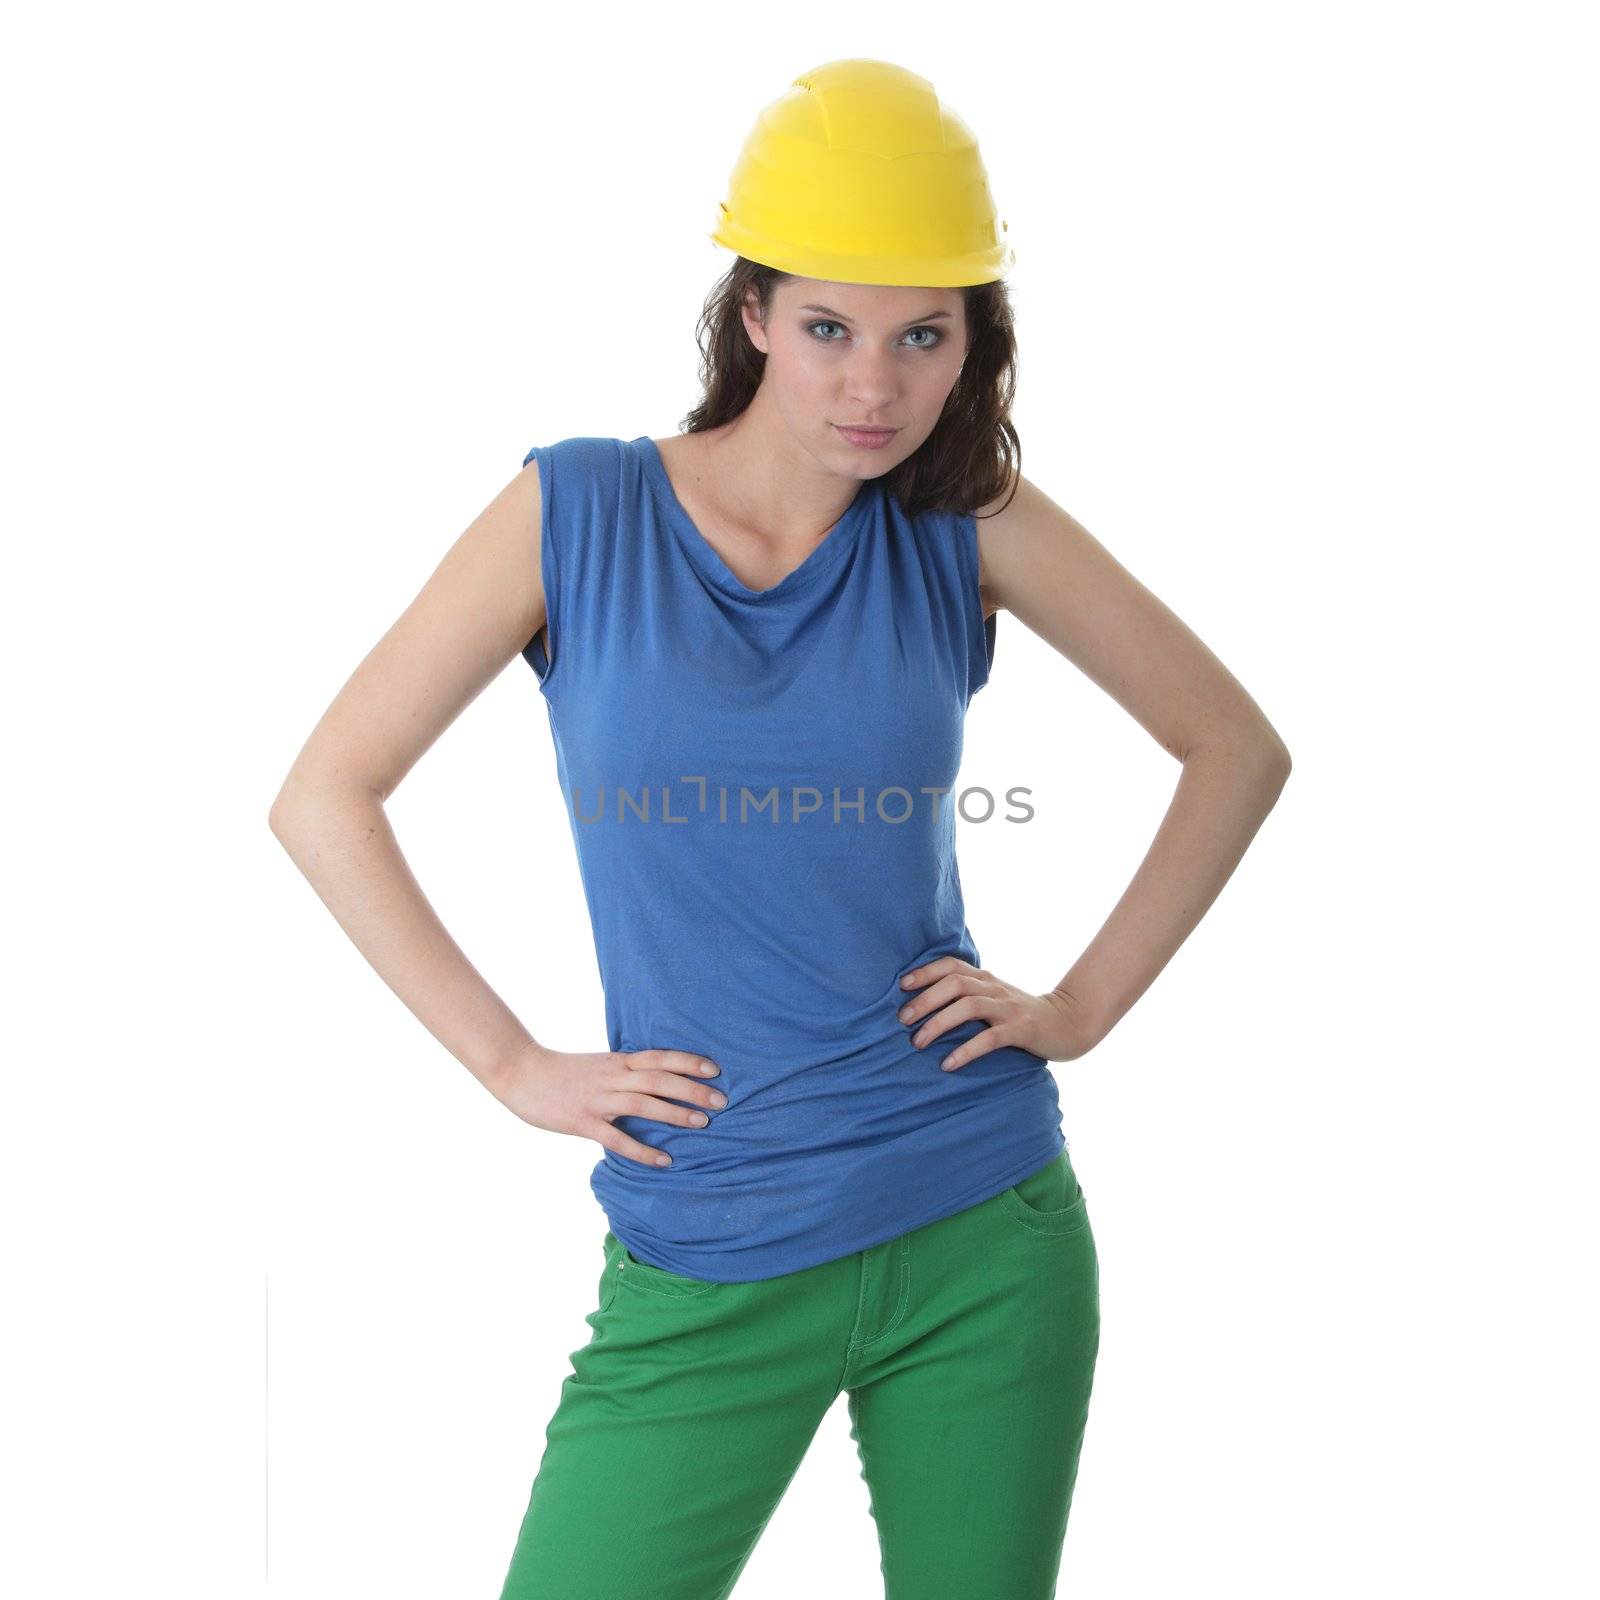 Sexy young woman construction worker contractor by BDS